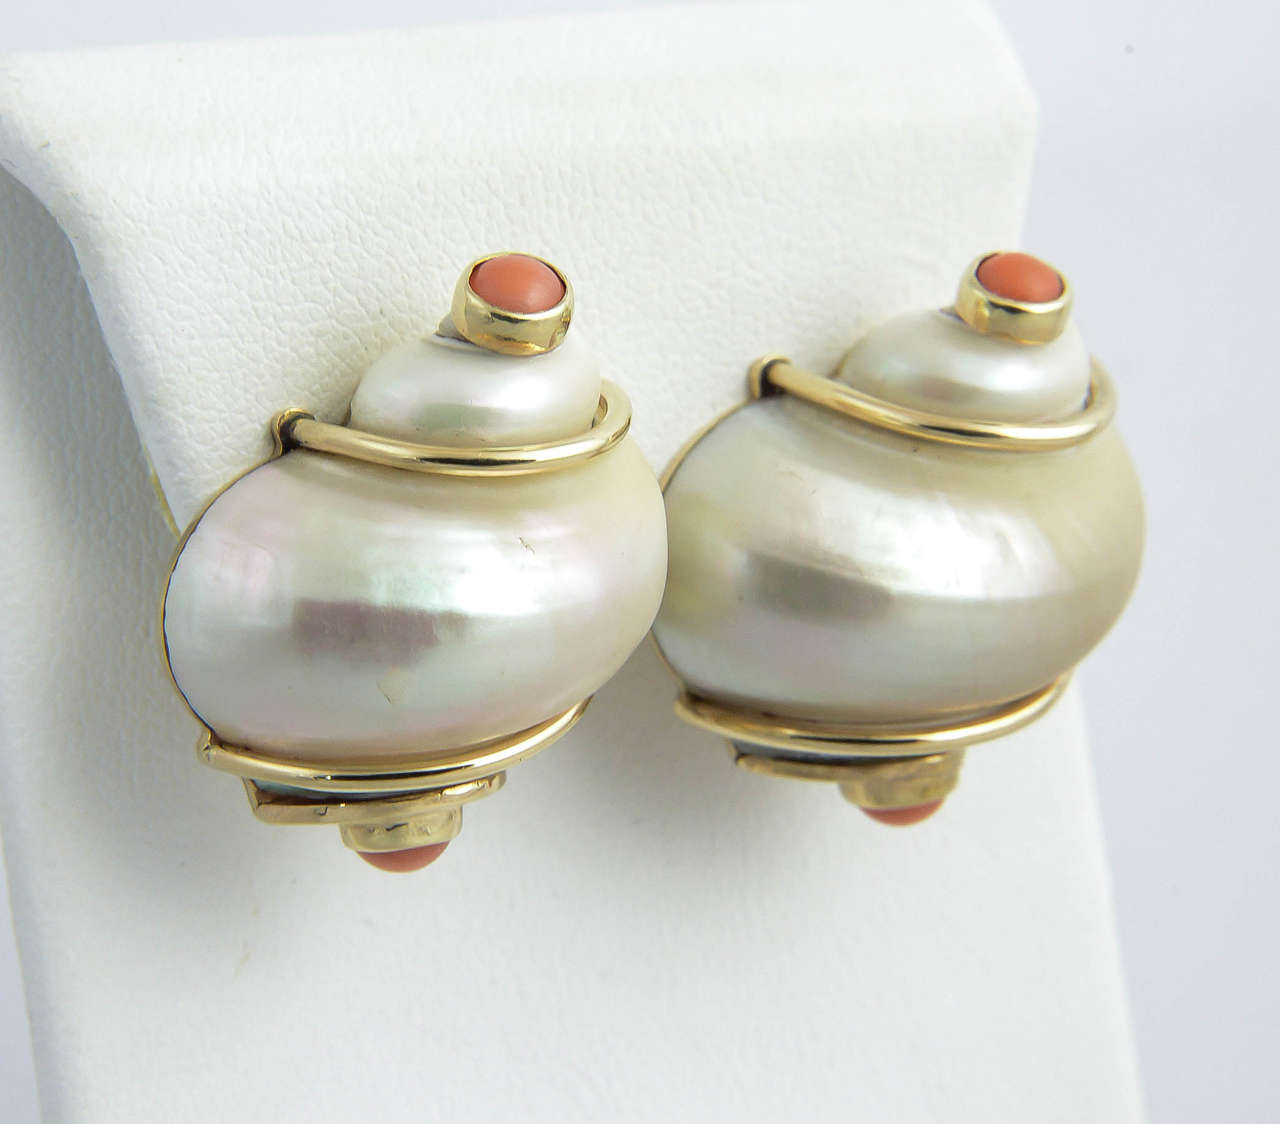 These are the classic Seaman Schepps Shell ear clips mounted in 14k yellow gold.